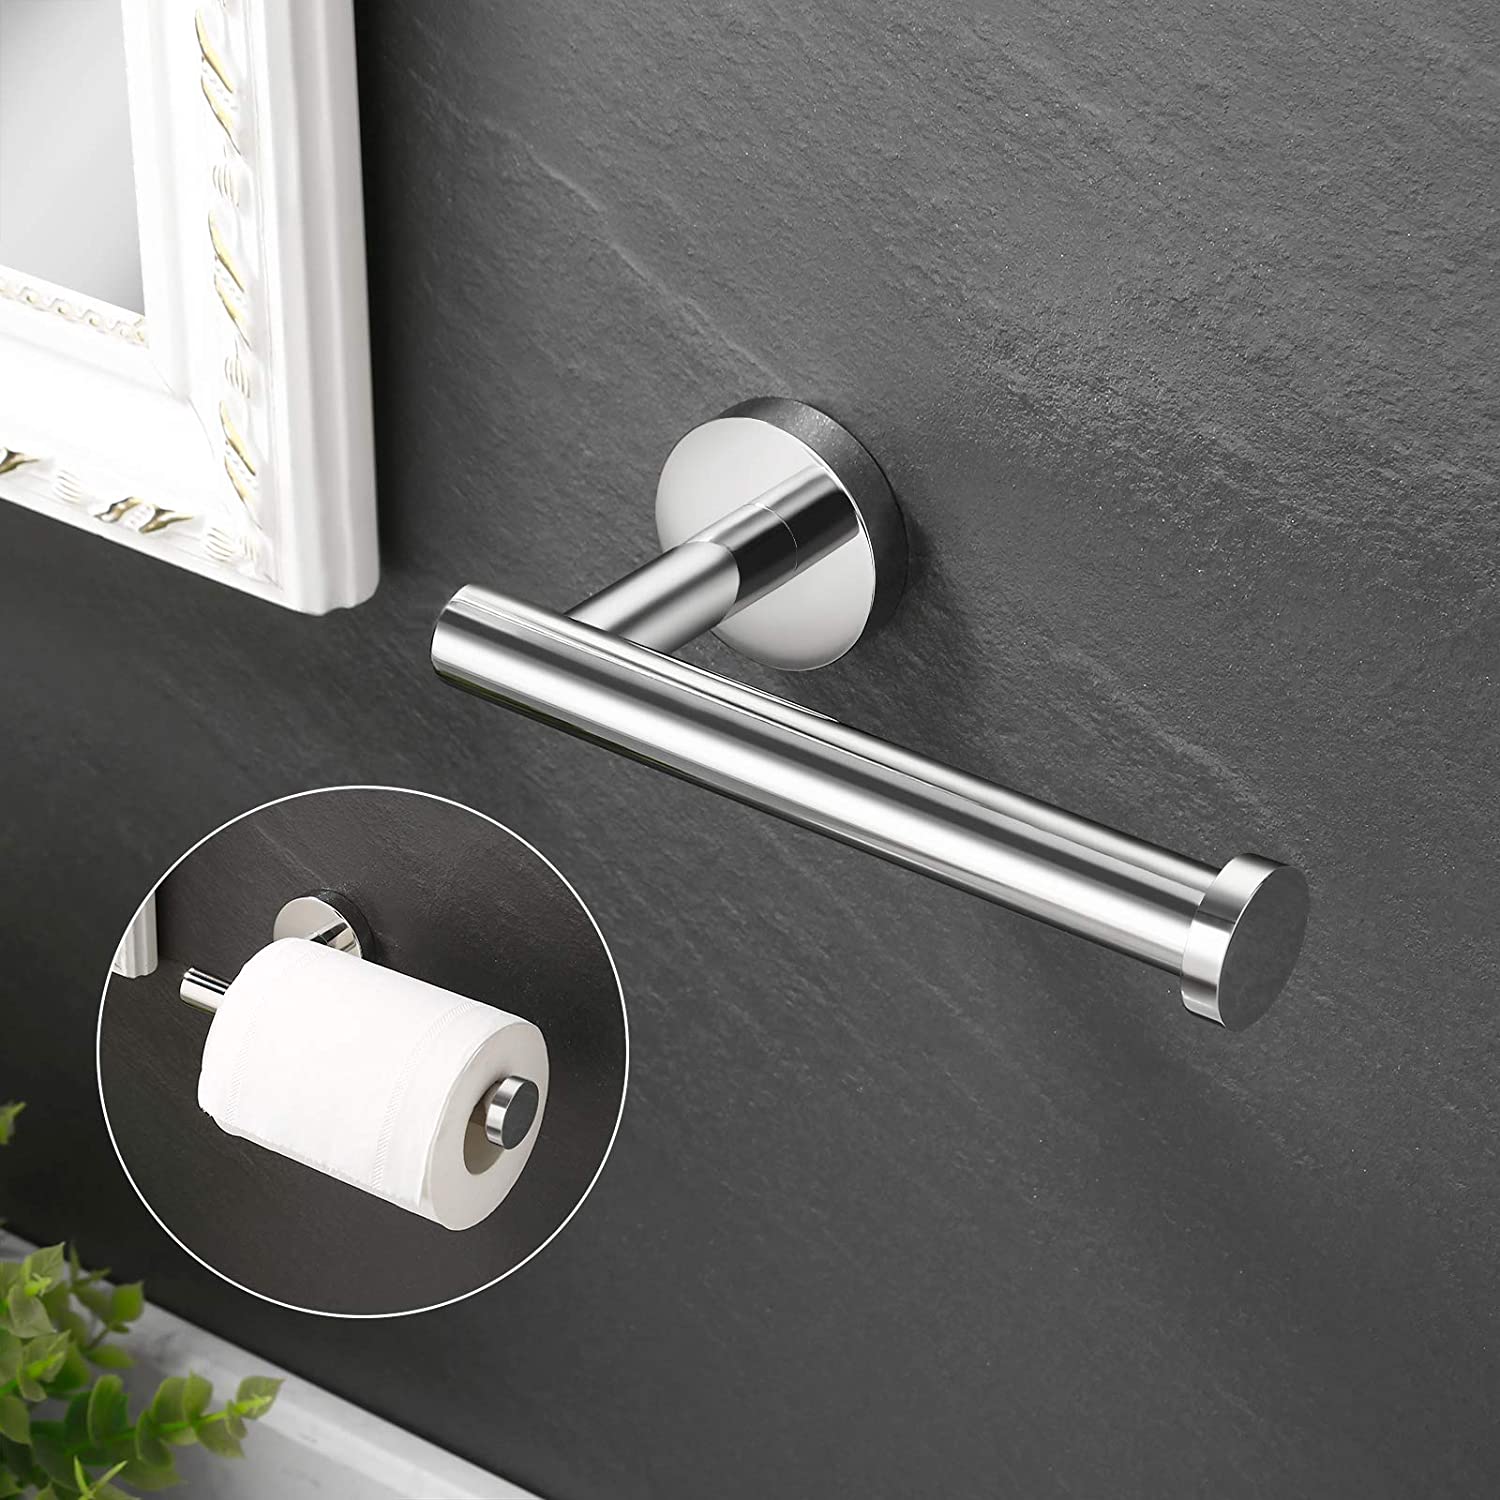 KES Toilet Paper Holder SUS 304 Stainless Steel Storage Rustproof Bathroom Paper Towel Dispenser Tissue Roll Hanger Contemporary Style Wall Mount, Polished Finish, A2175S12 B23-DS558v